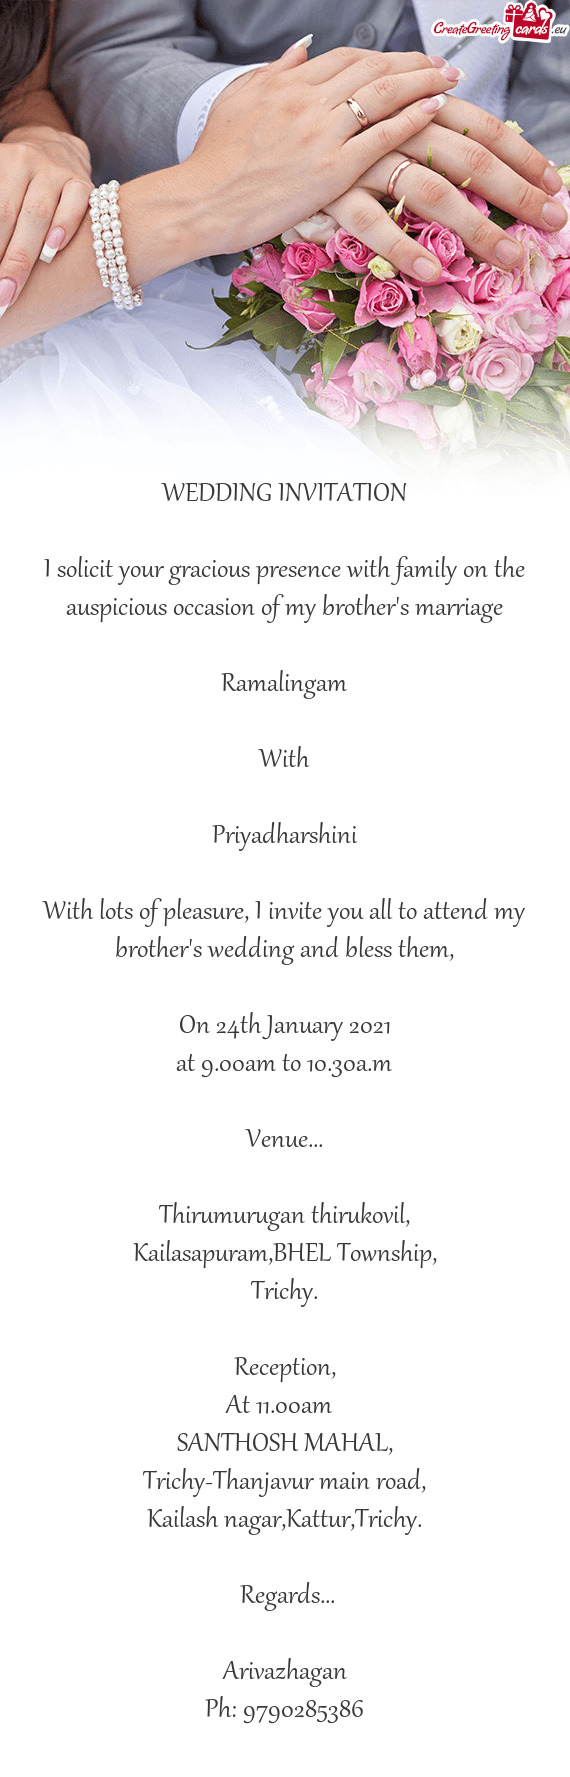 With lots of pleasure, I invite you all to attend my brother